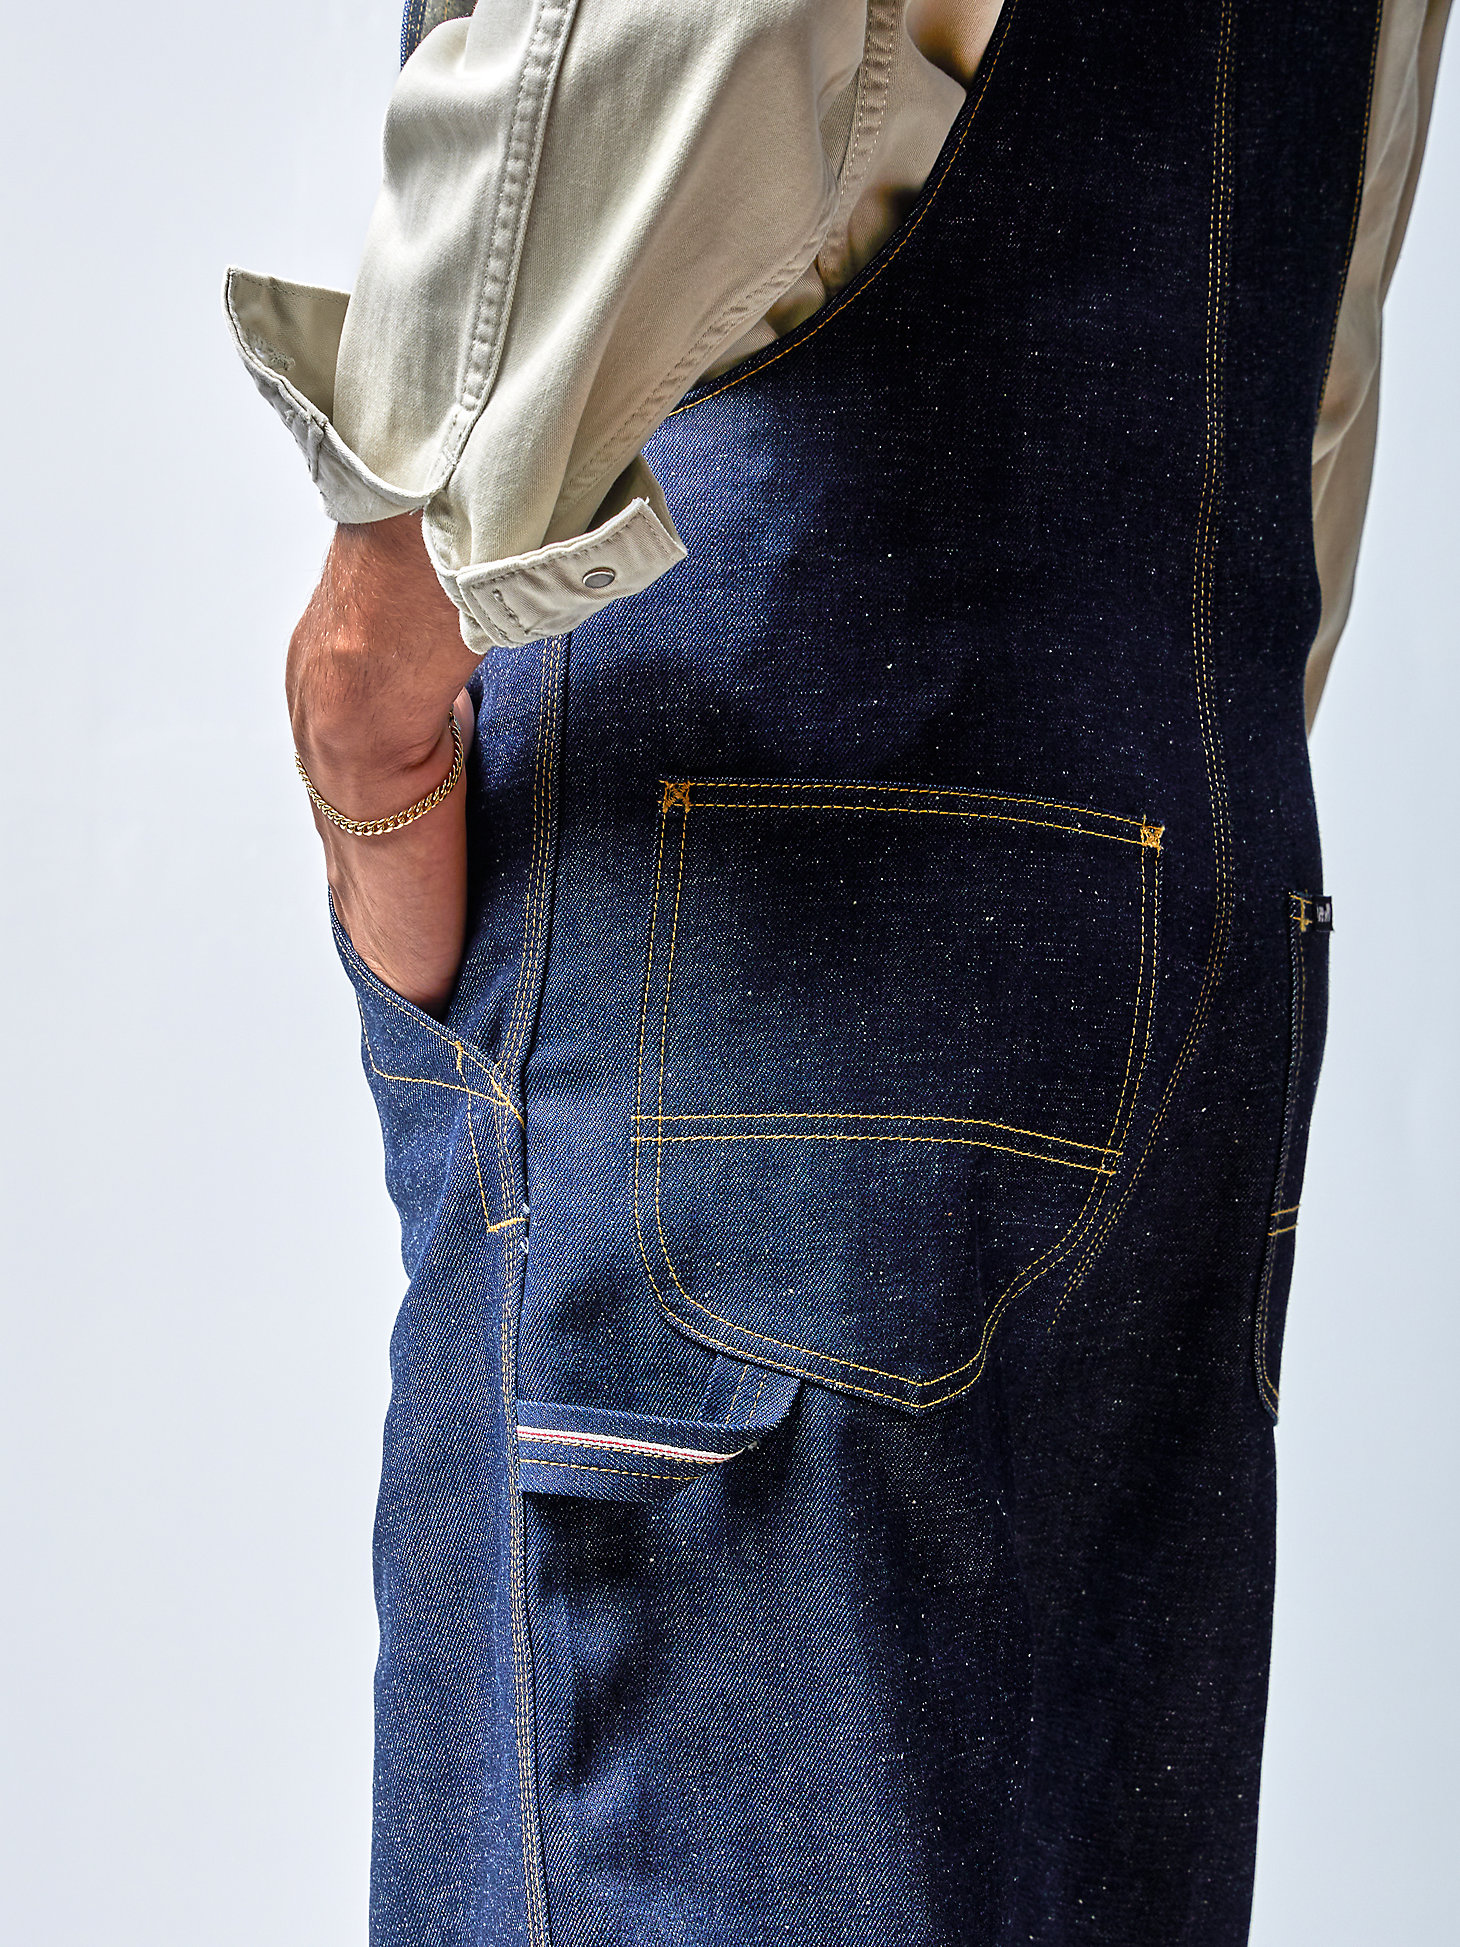 Men's Lee® x The Brooklyn Circus® Whizit Zip Overall in Indigo Selvedge alternative view 5